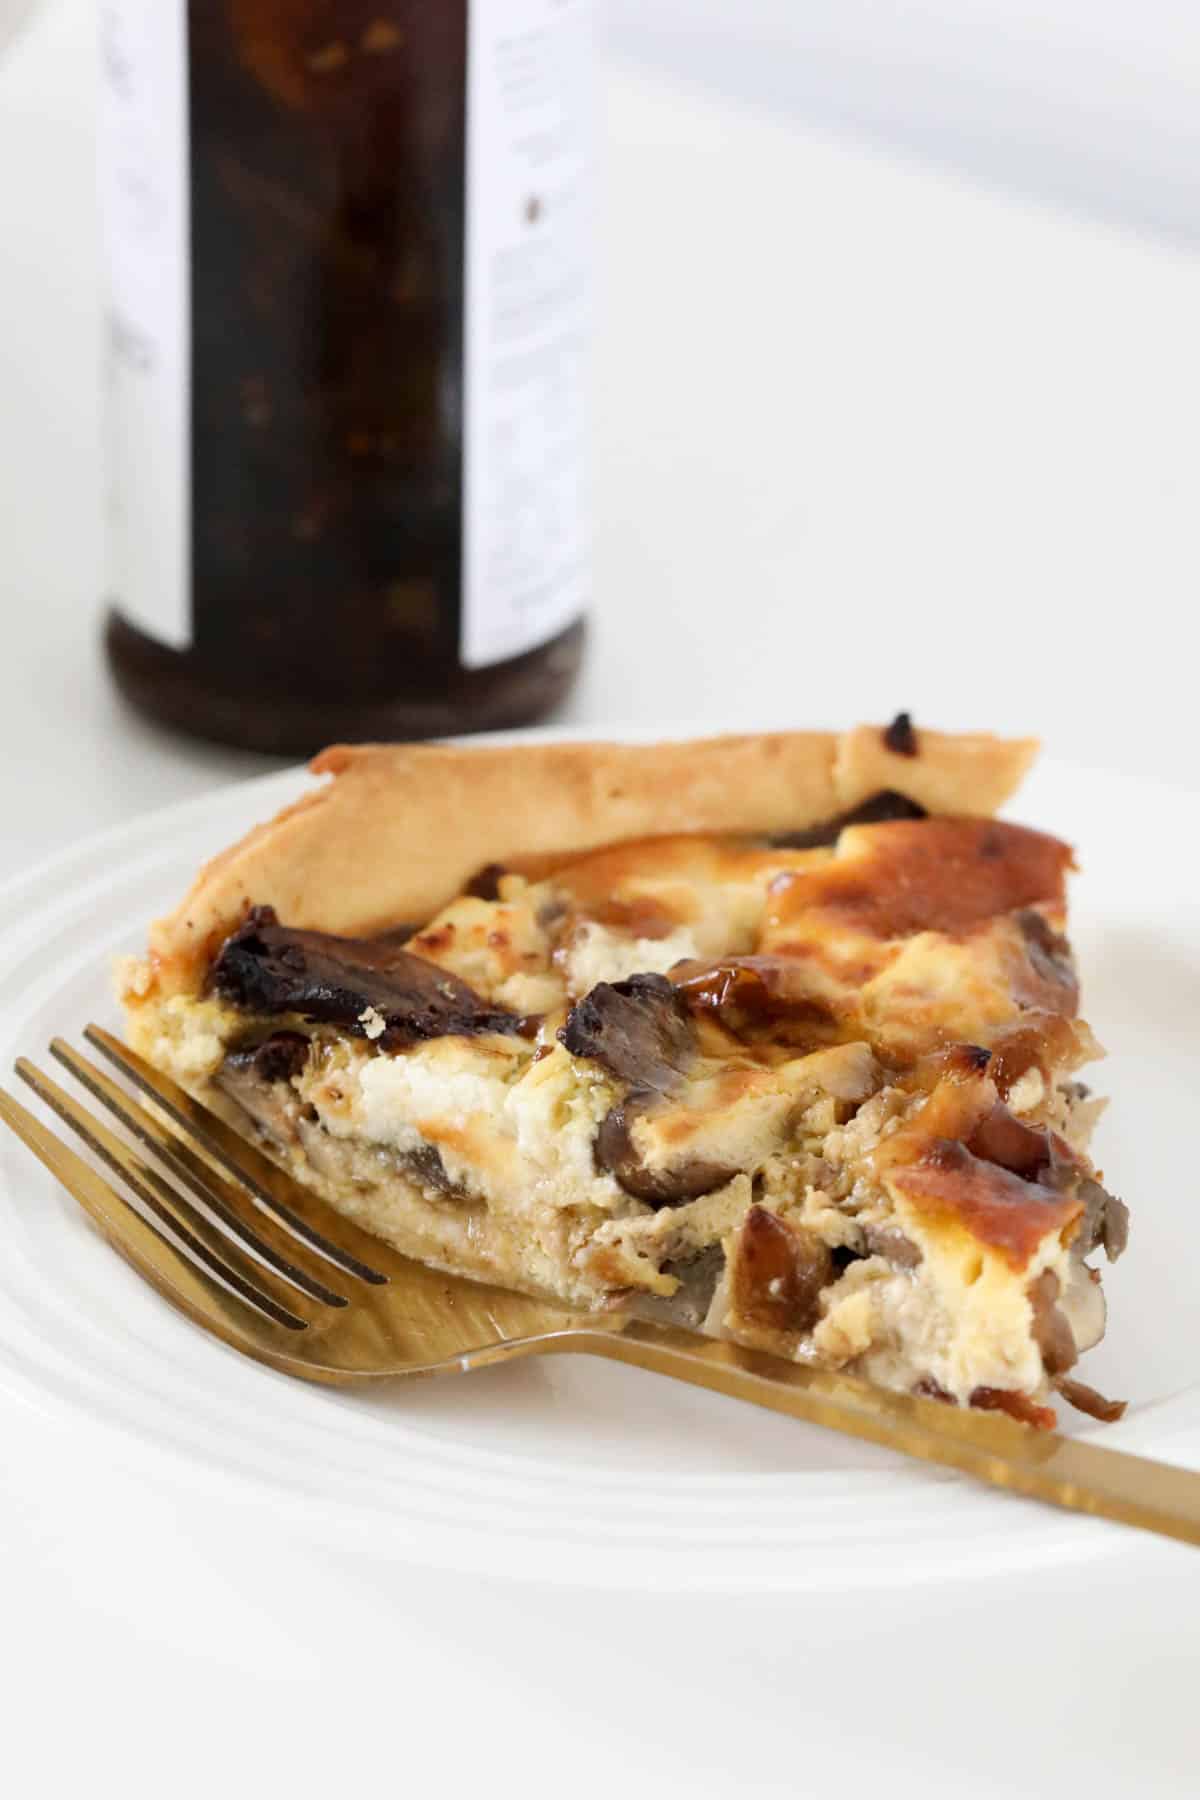 Mushroom tart served in front of a jar of caramelised onion relish.